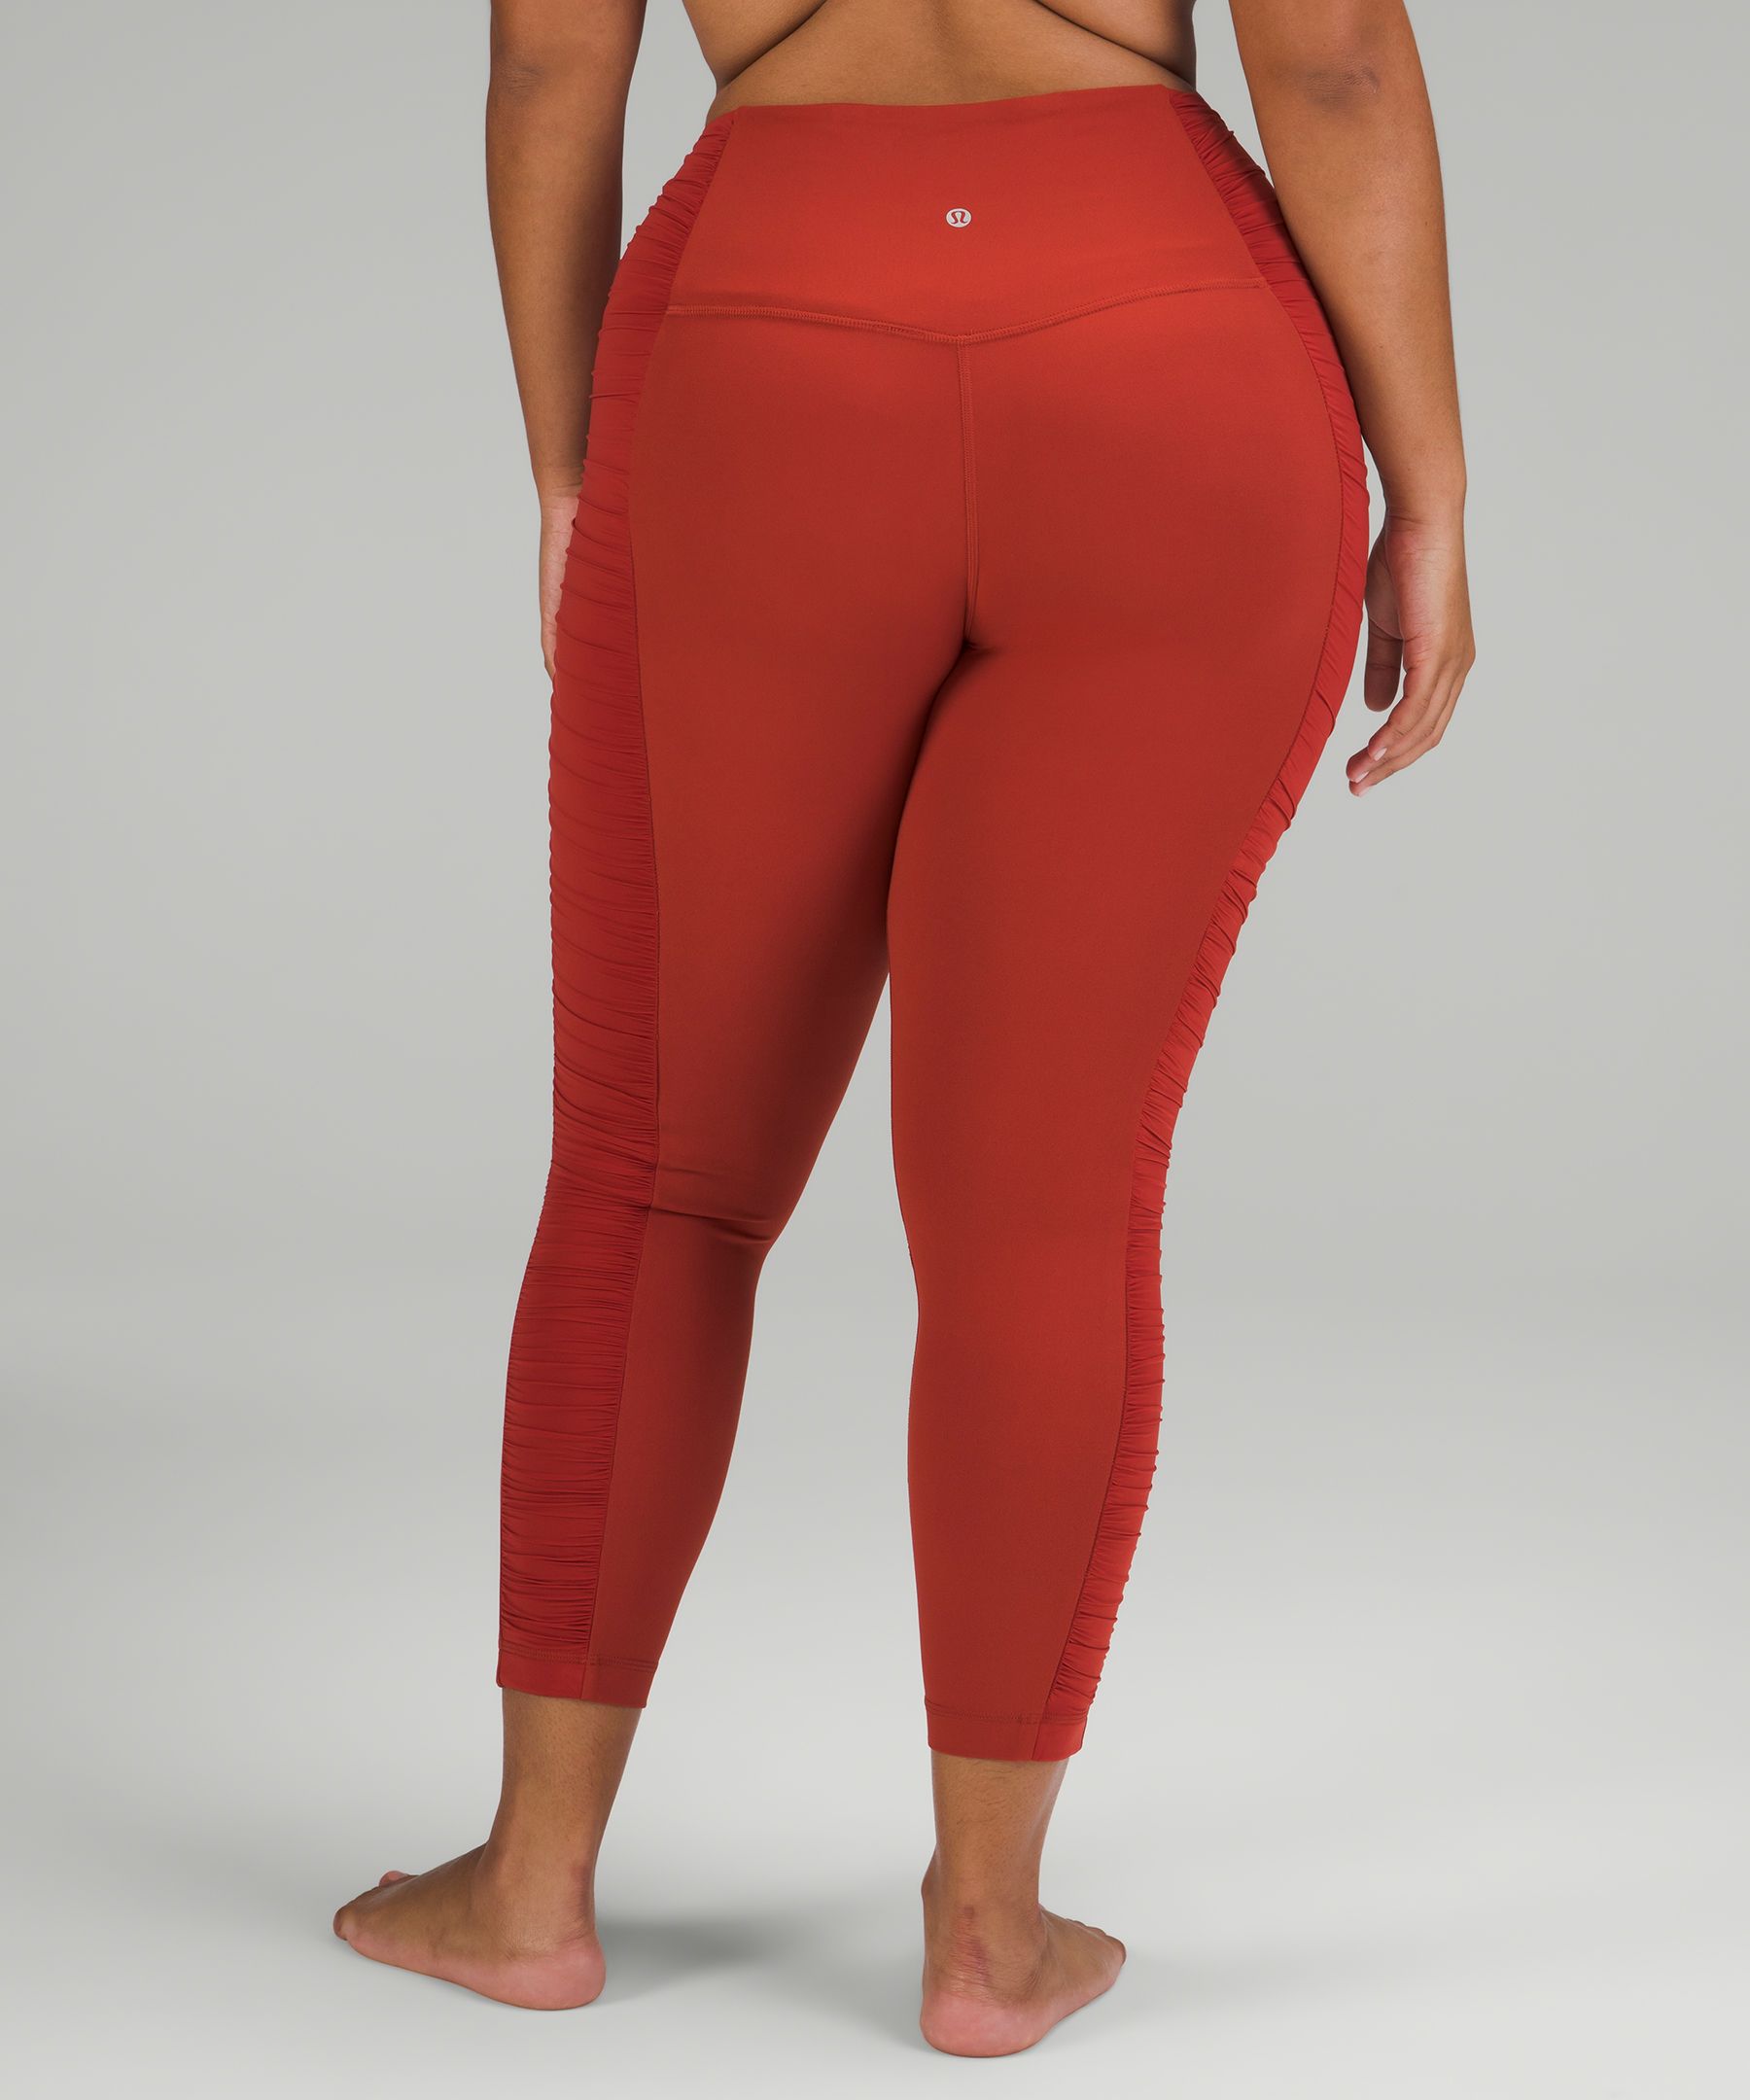 discounted on clearance Lululemon super high rise align 25